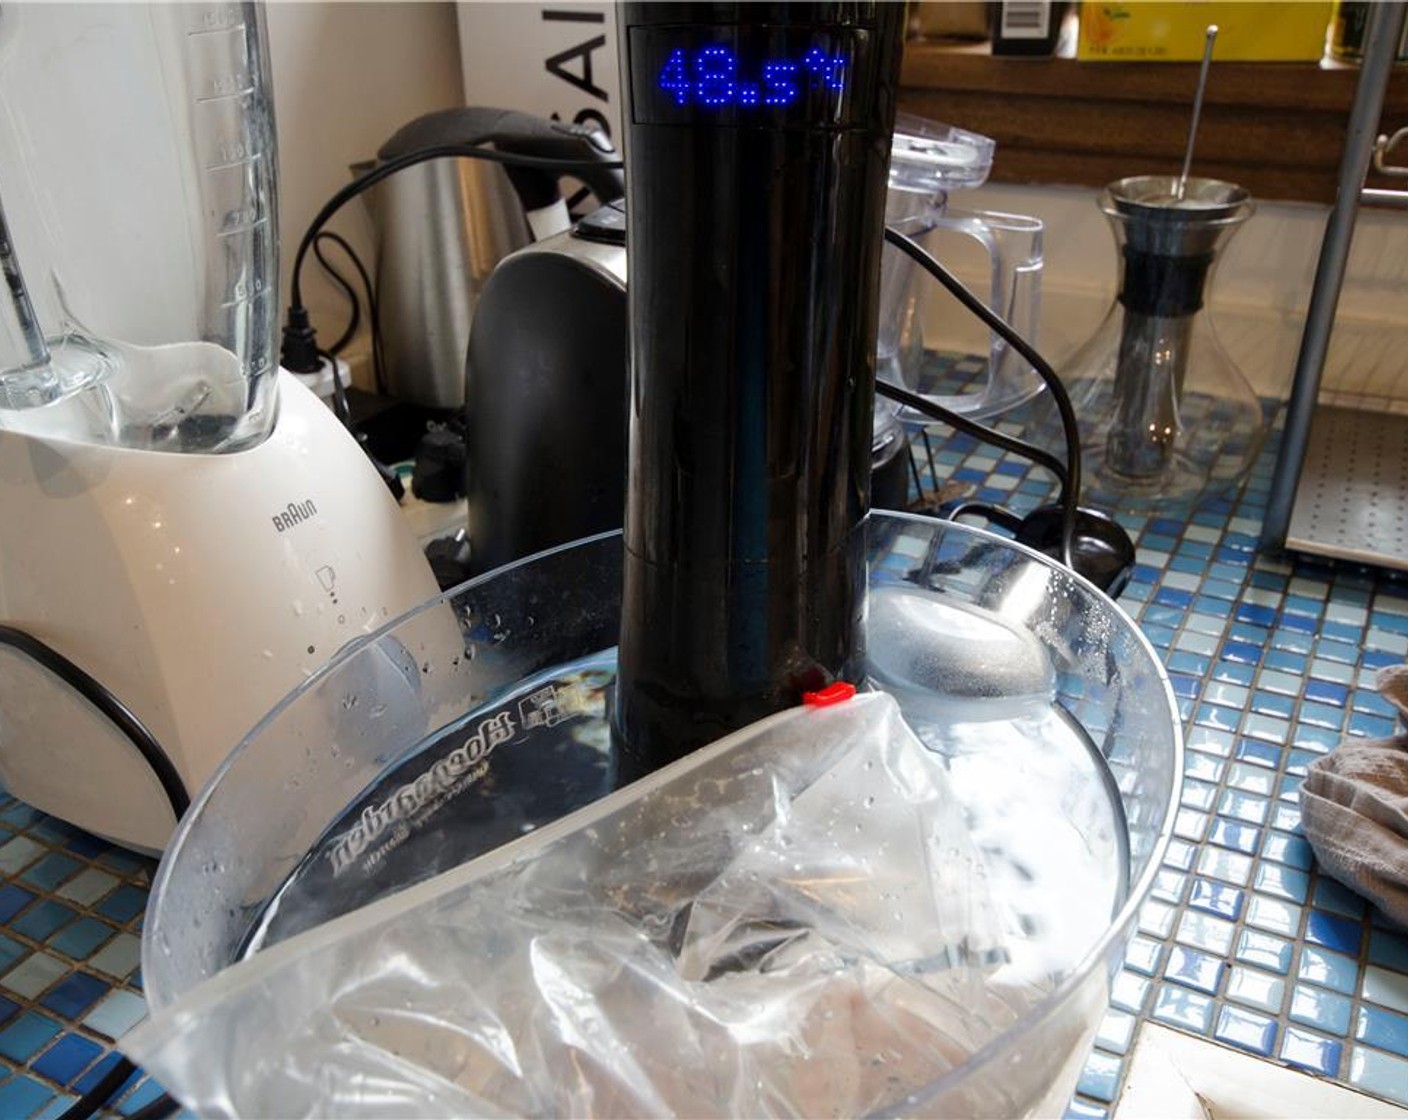 step 7 Transfer to a sous-vide-style vacuum seal bag. Seal tightly, and let rest for at least 6 hours and up to 2 days.